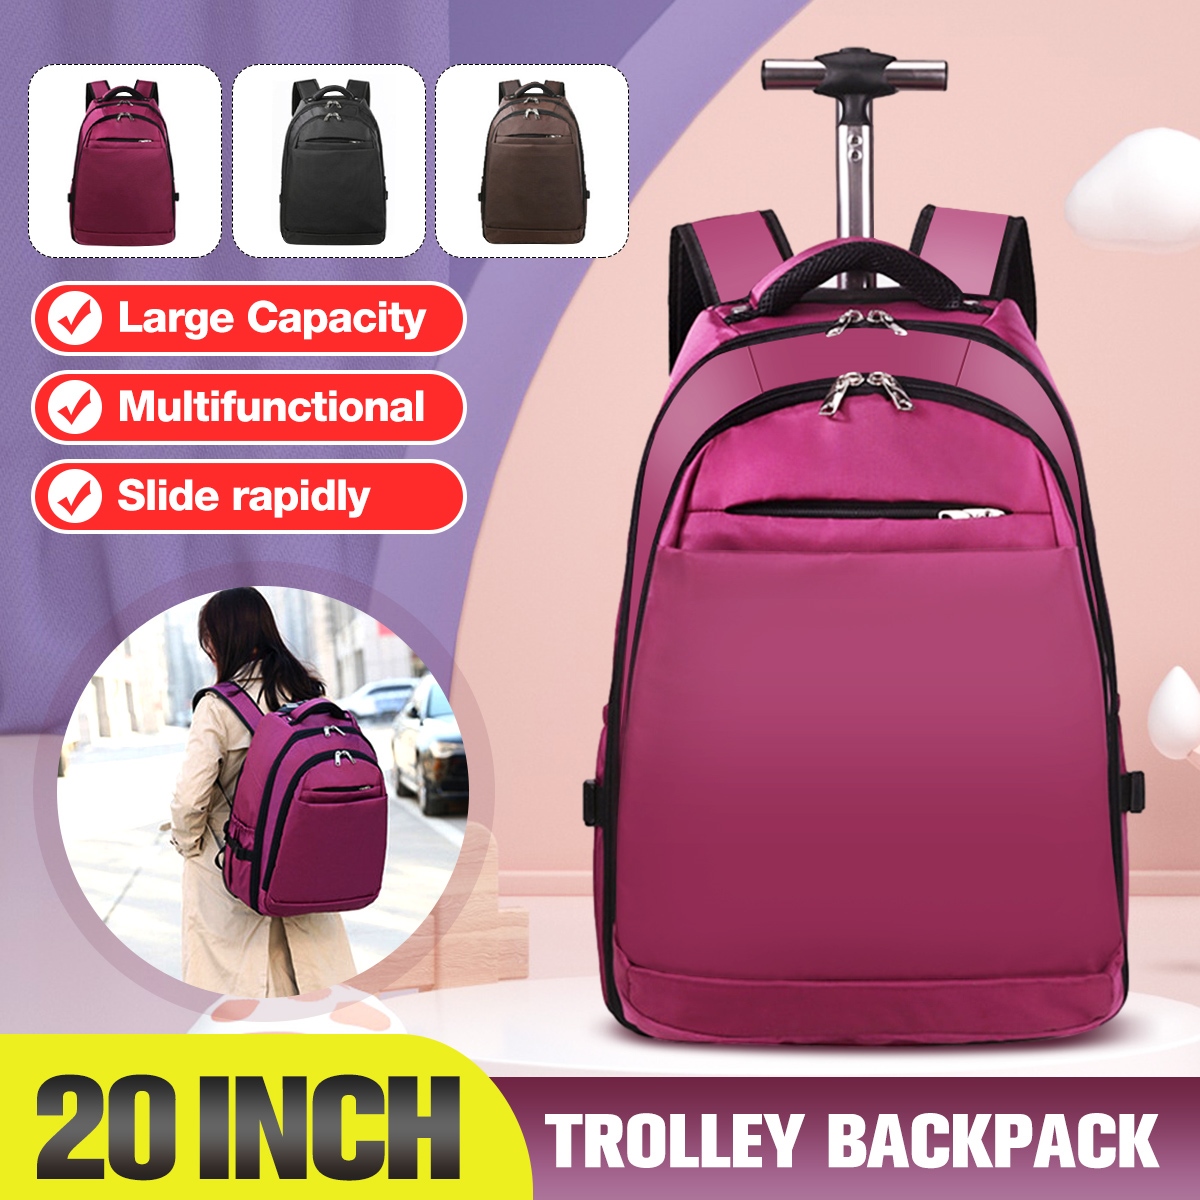 20 inch Wheeled Laptop Trolley Boarding Suitcase Luggage Backpack Rucksack Bags